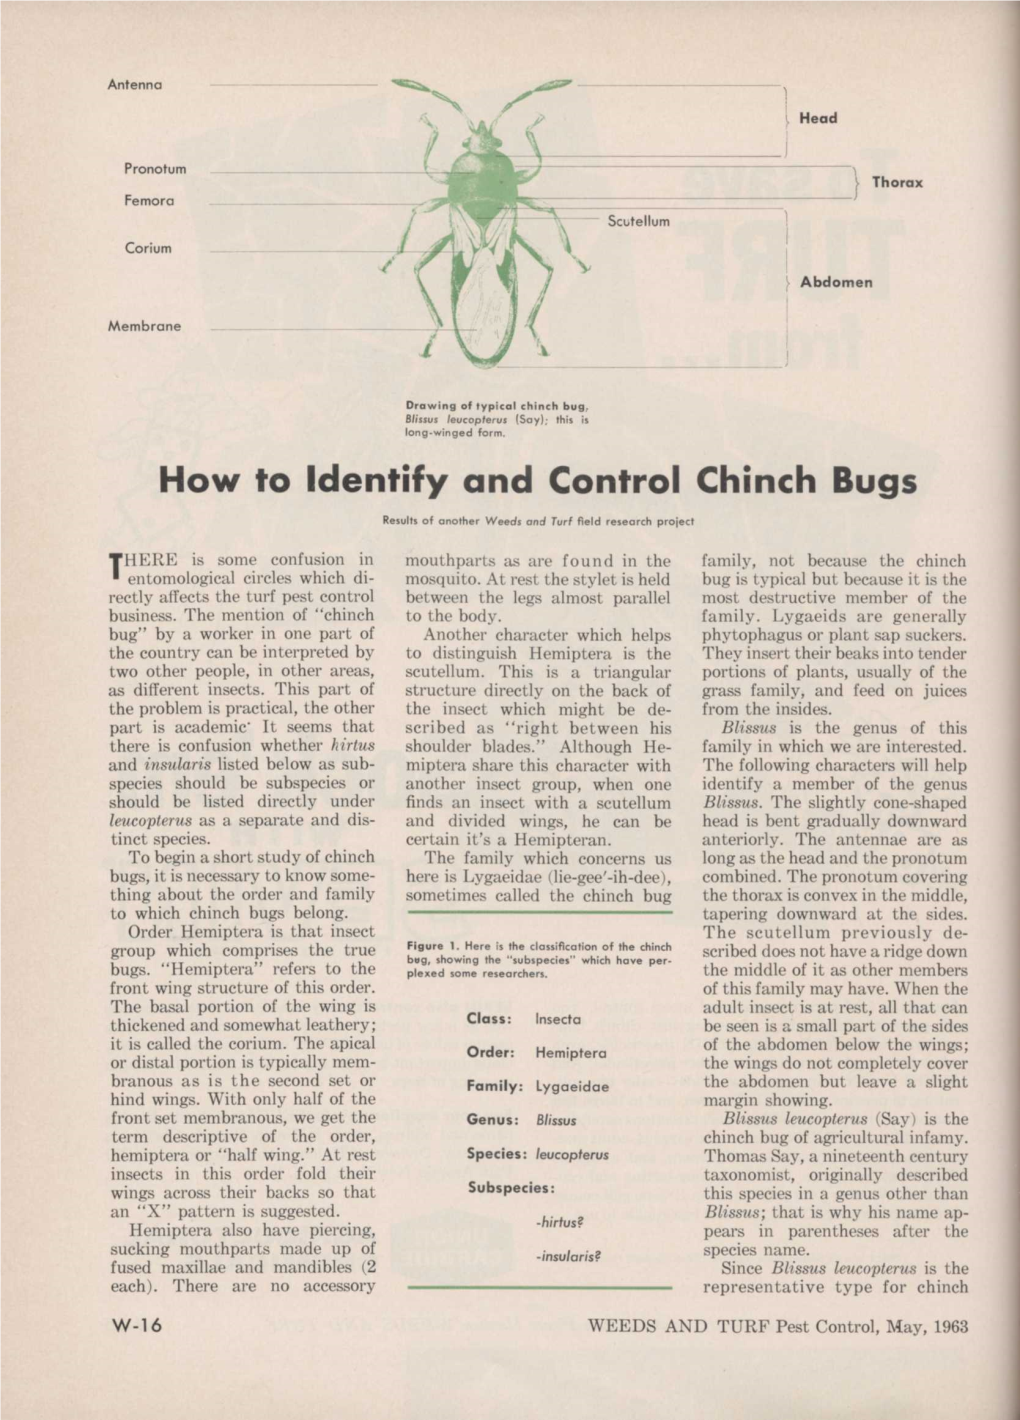 How to Identify and Control Chinch Bugs